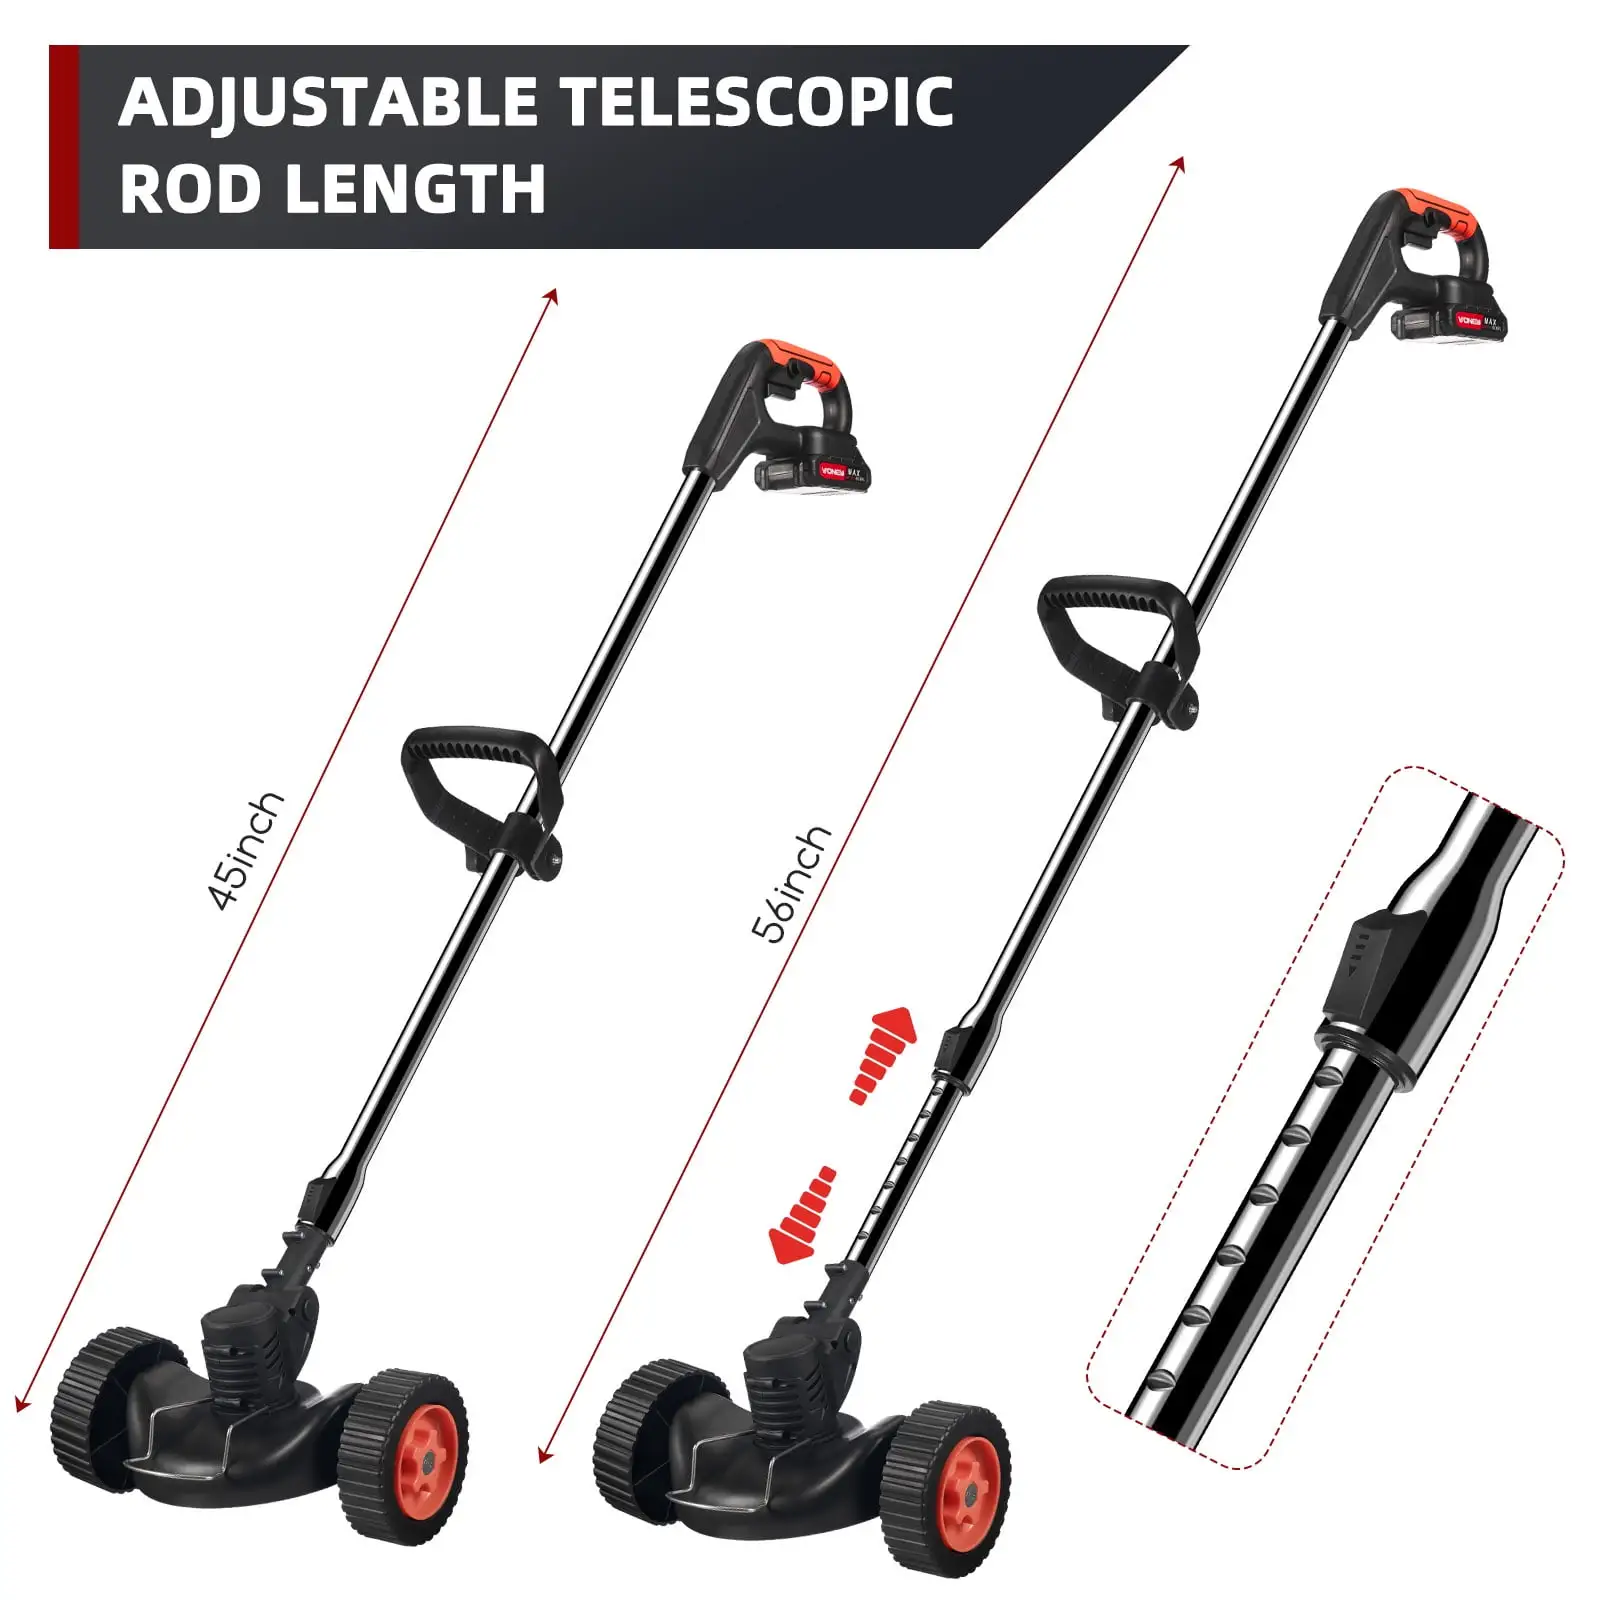 Limited Time SaleClearance🔥Multifunctional Cordless Brush Cutter